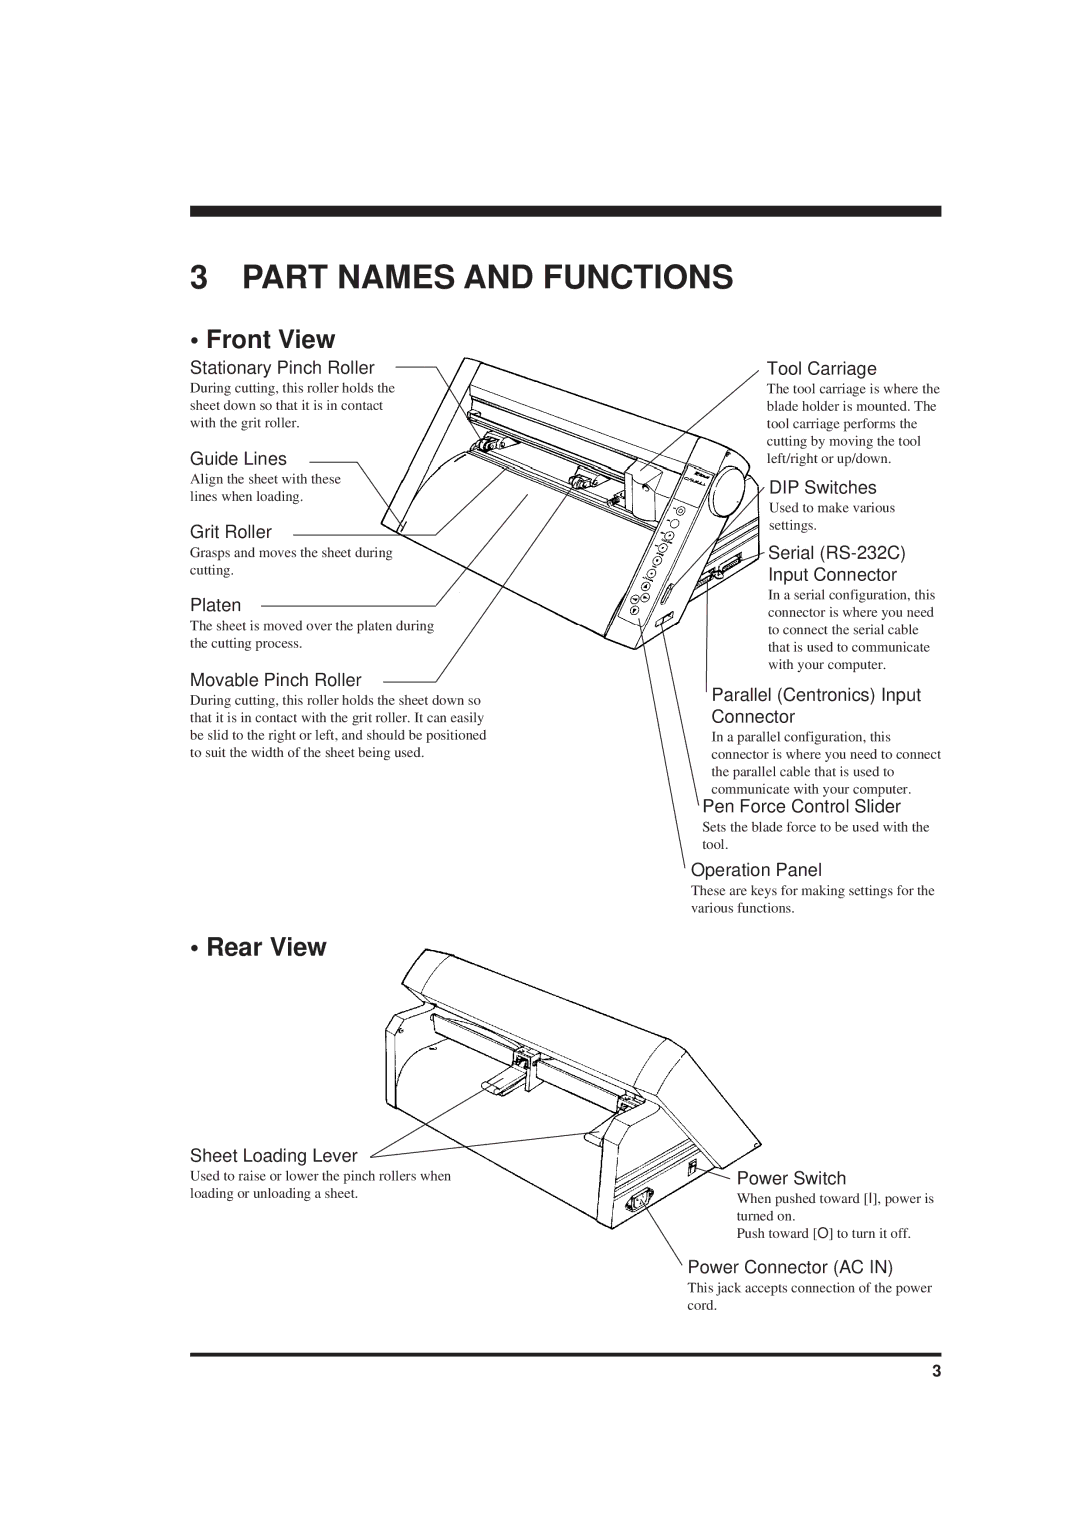 Roland PNC-900 user manual Part Names and Functions, Front View, Rear View 